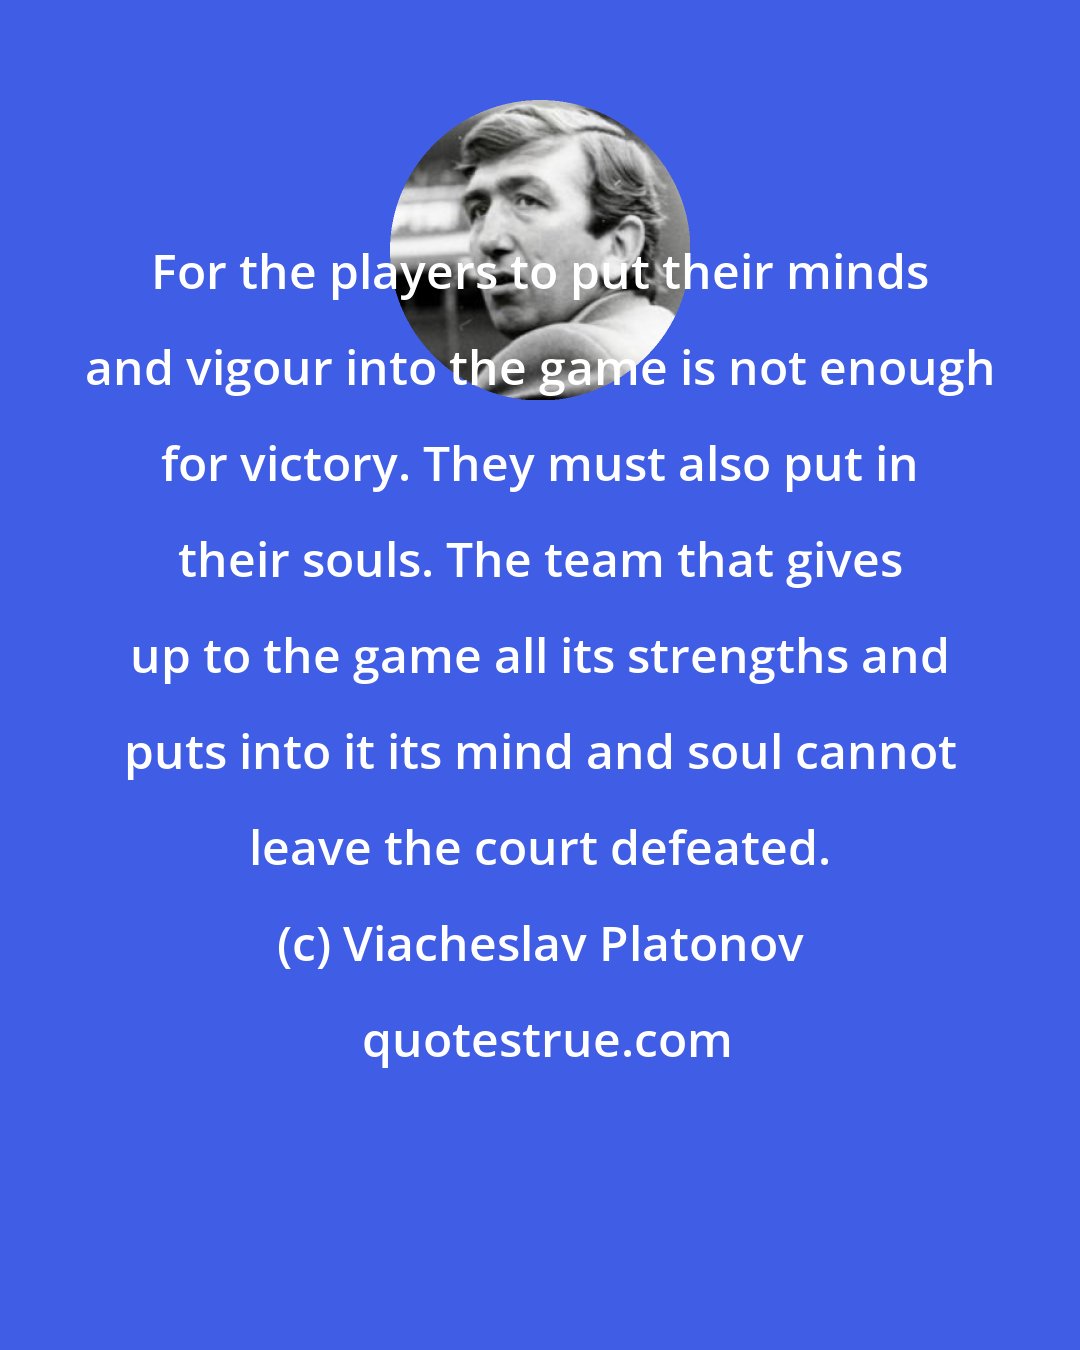 Viacheslav Platonov: For the players to put their minds and vigour into the game is not enough for victory. They must also put in their souls. The team that gives up to the game all its strengths and puts into it its mind and soul cannot leave the court defeated.